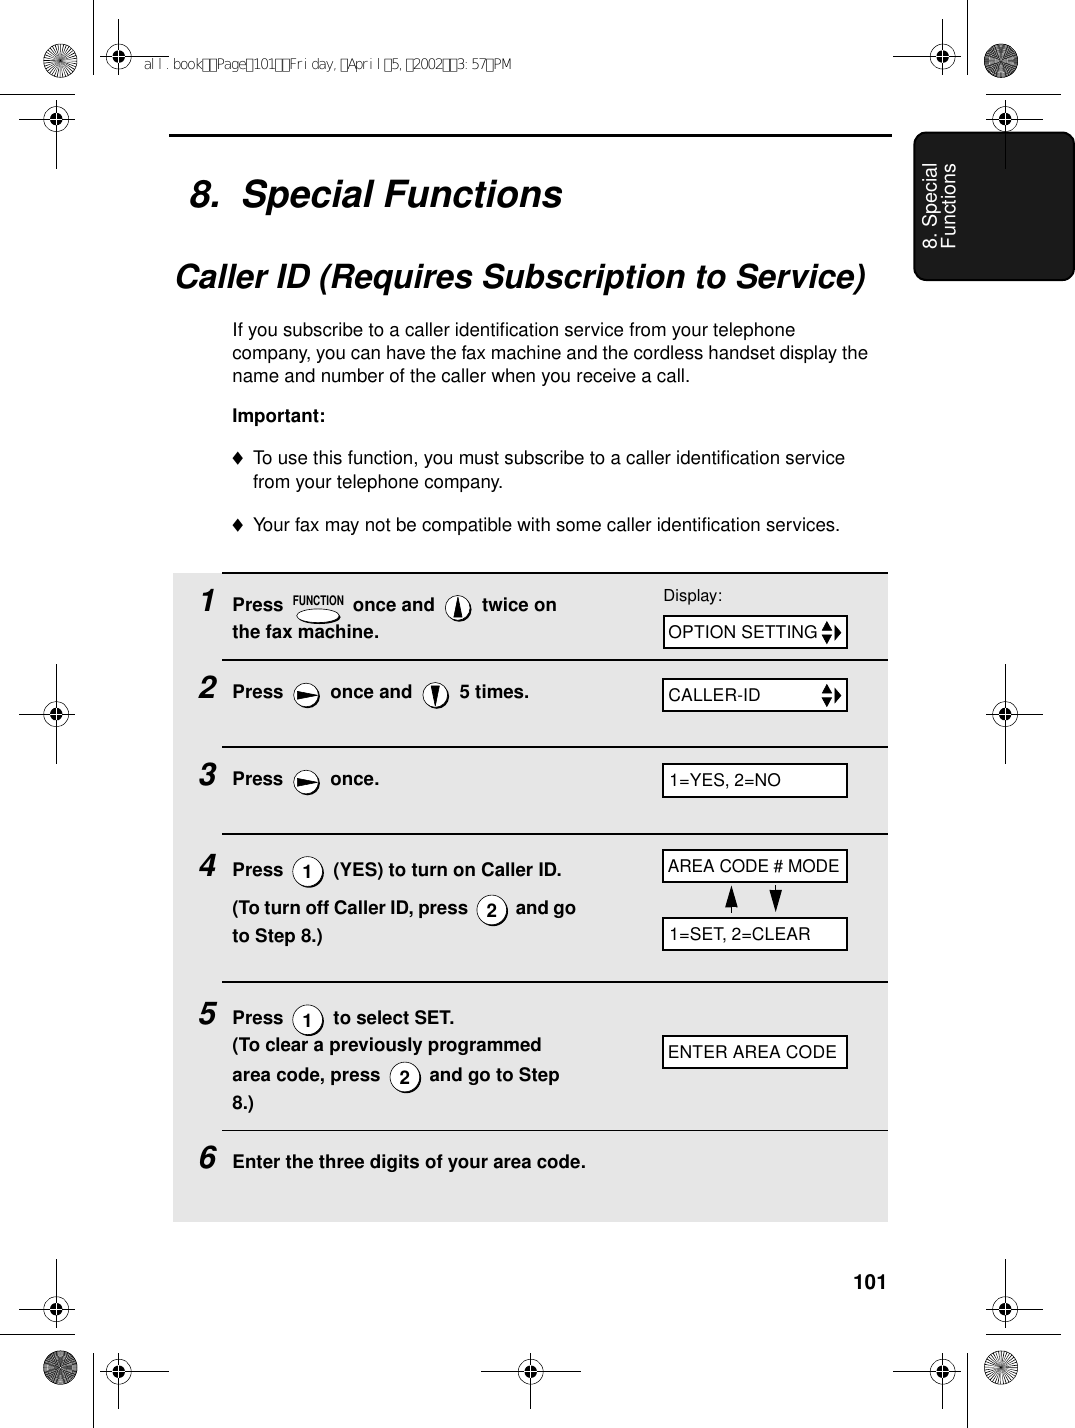 1018. Special Functions8.  Special FunctionsCaller ID (Requires Subscription to Service)If you subscribe to a caller identification service from your telephone company, you can have the fax machine and the cordless handset display the name and number of the caller when you receive a call.Important:♦To use this function, you must subscribe to a caller identification service from your telephone company.♦Your fax may not be compatible with some caller identification services.1Press   once and   twice on the fax machine.2Press   once and   5 times.3Press  once.4Press   (YES) to turn on Caller ID.(To turn off Caller ID, press   and go to Step 8.)5Press   to select SET. (To clear a previously programmed area code, press   and go to Step 8.)6Enter the three digits of your area code.FUNCTION1212Display:OPTION SETTINGCALLER-IDAREA CODE # MODEENTER AREA CODE1=YES, 2=NO1=SET, 2=CLEARall.bookPage101Friday,April5,20023:57PM